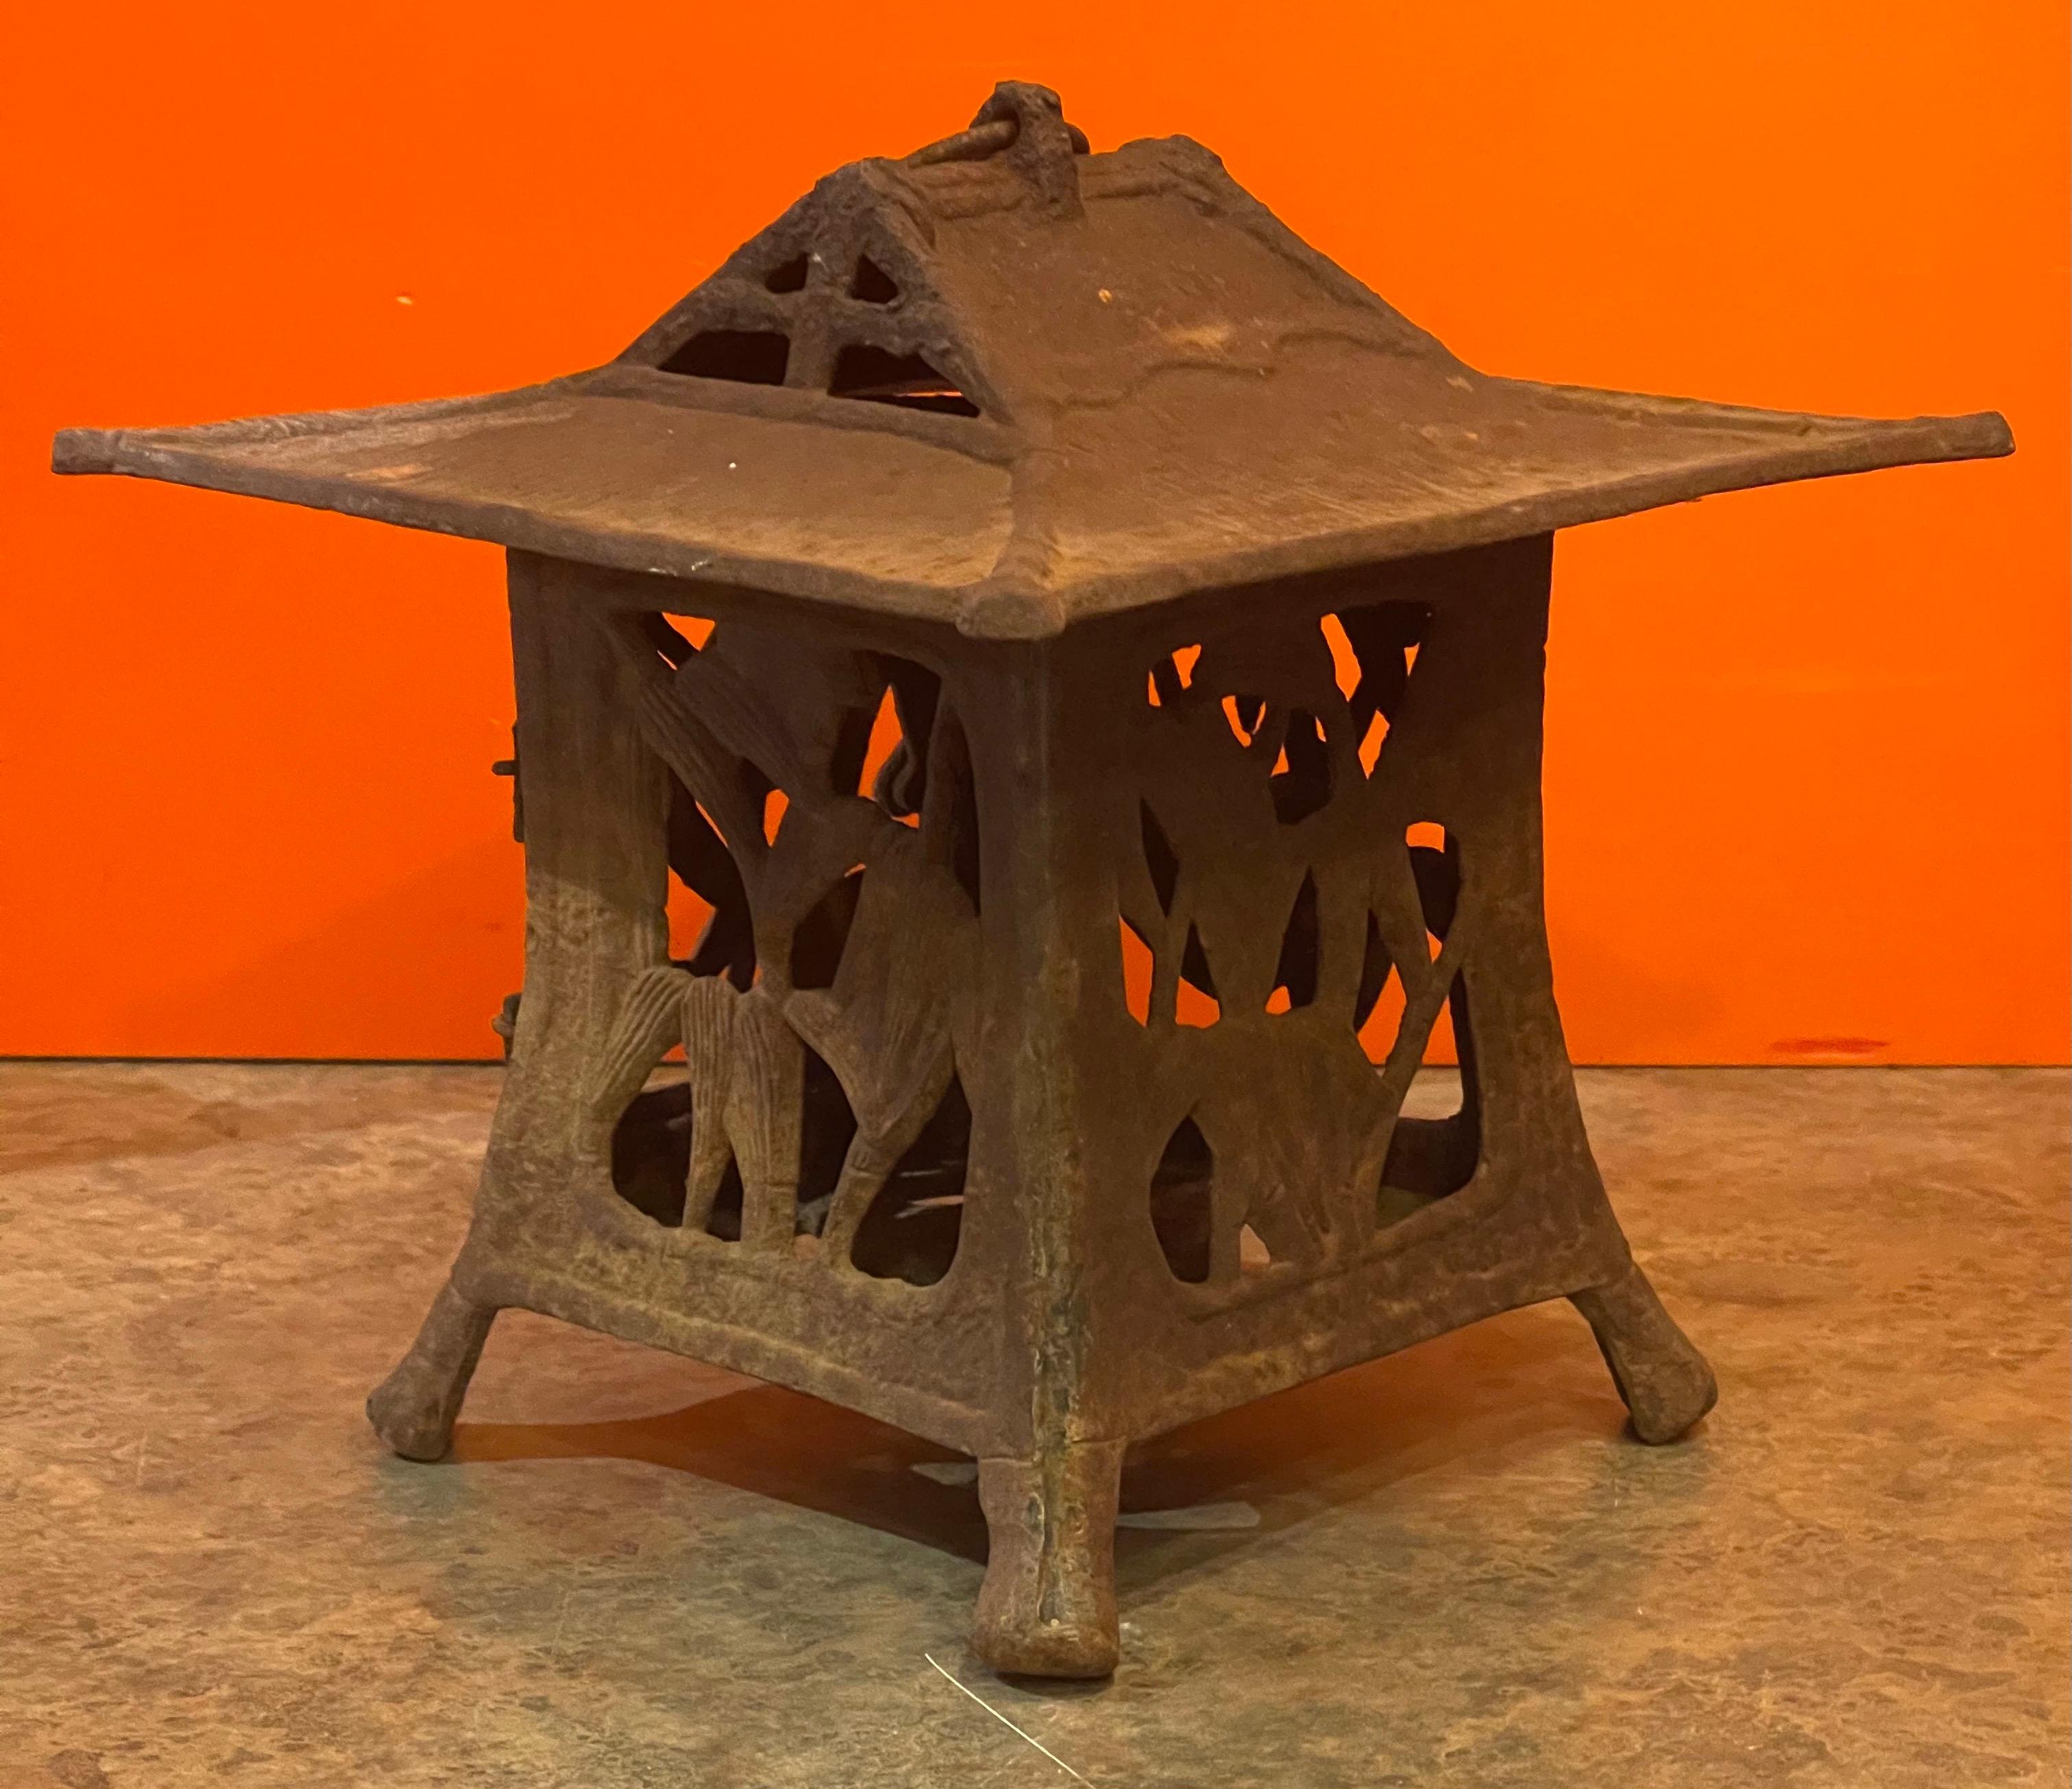 Vintage distressed cast iron Japanese pagoda lantern, circa 1950s. The lantern has a great distressed rust patina and a wonderful look. The piece is solid and functional and has a small door that opens to allow a candle to be inserted. The pagoda